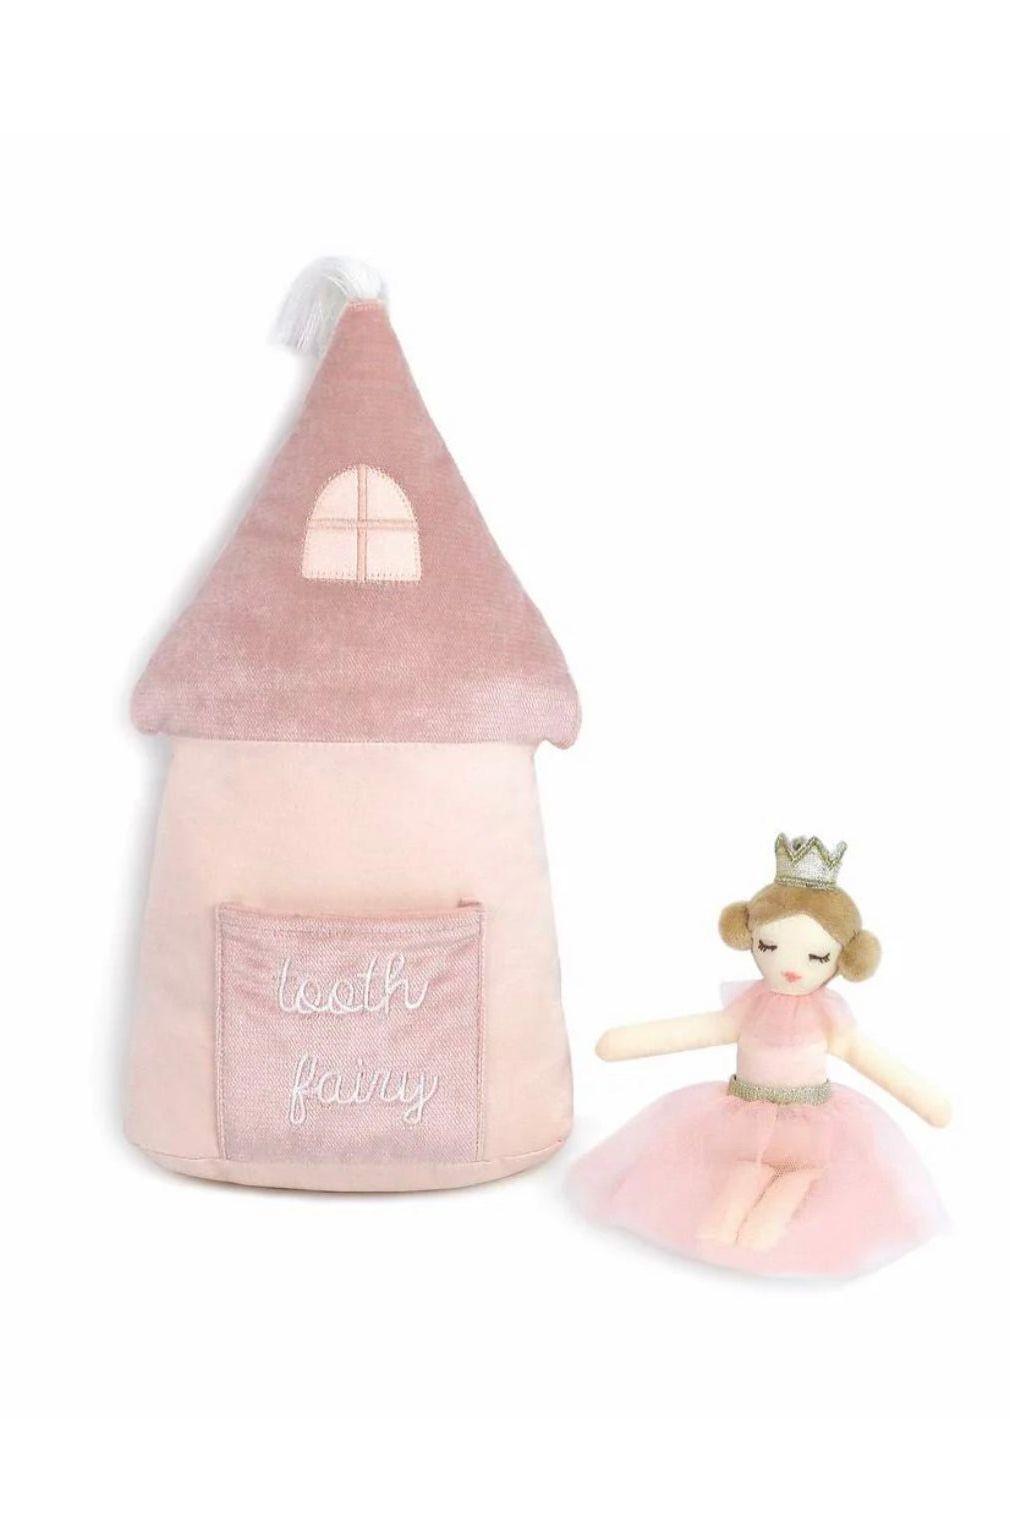 Princess and Her Castle Tooth Fairy Pillow - Enchanting Tooth Protector! - Sophia Rose Children's Boutique